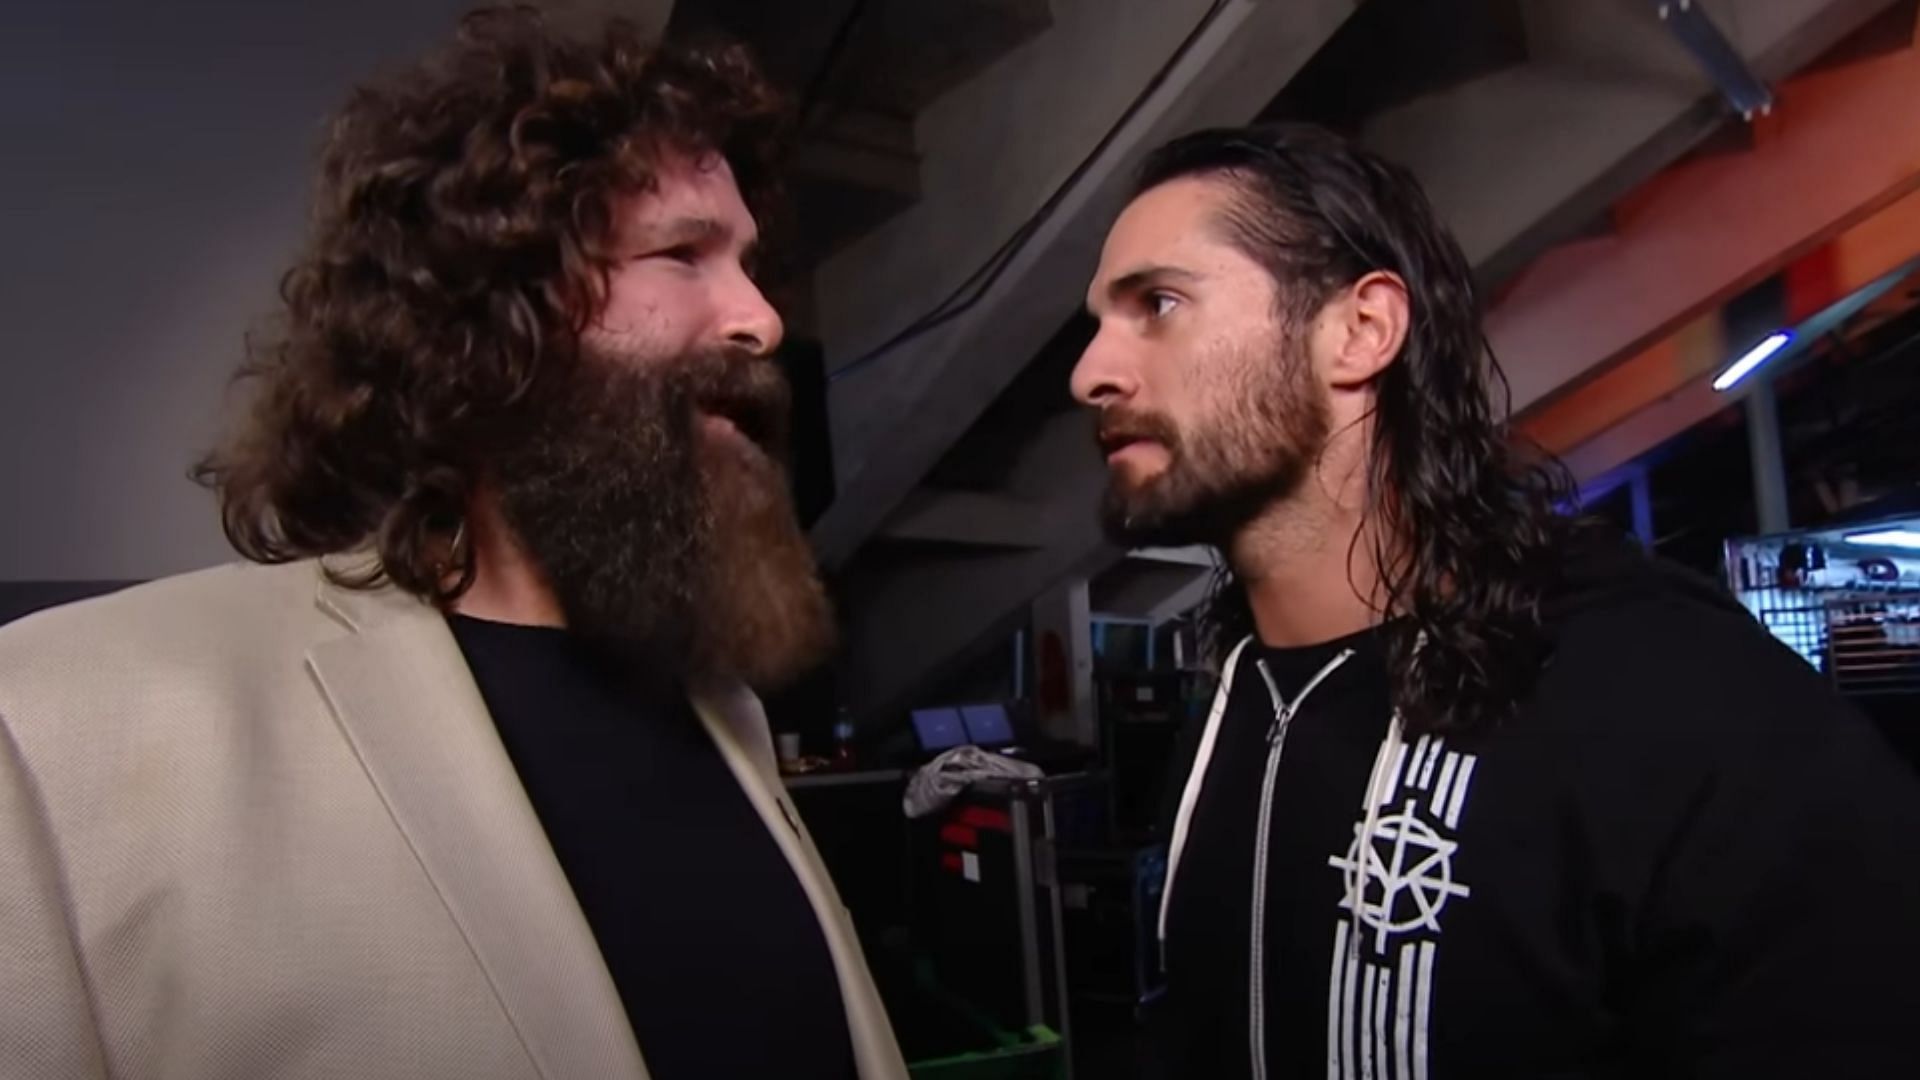 Mick Foley (left) and Seth Rollins (right)